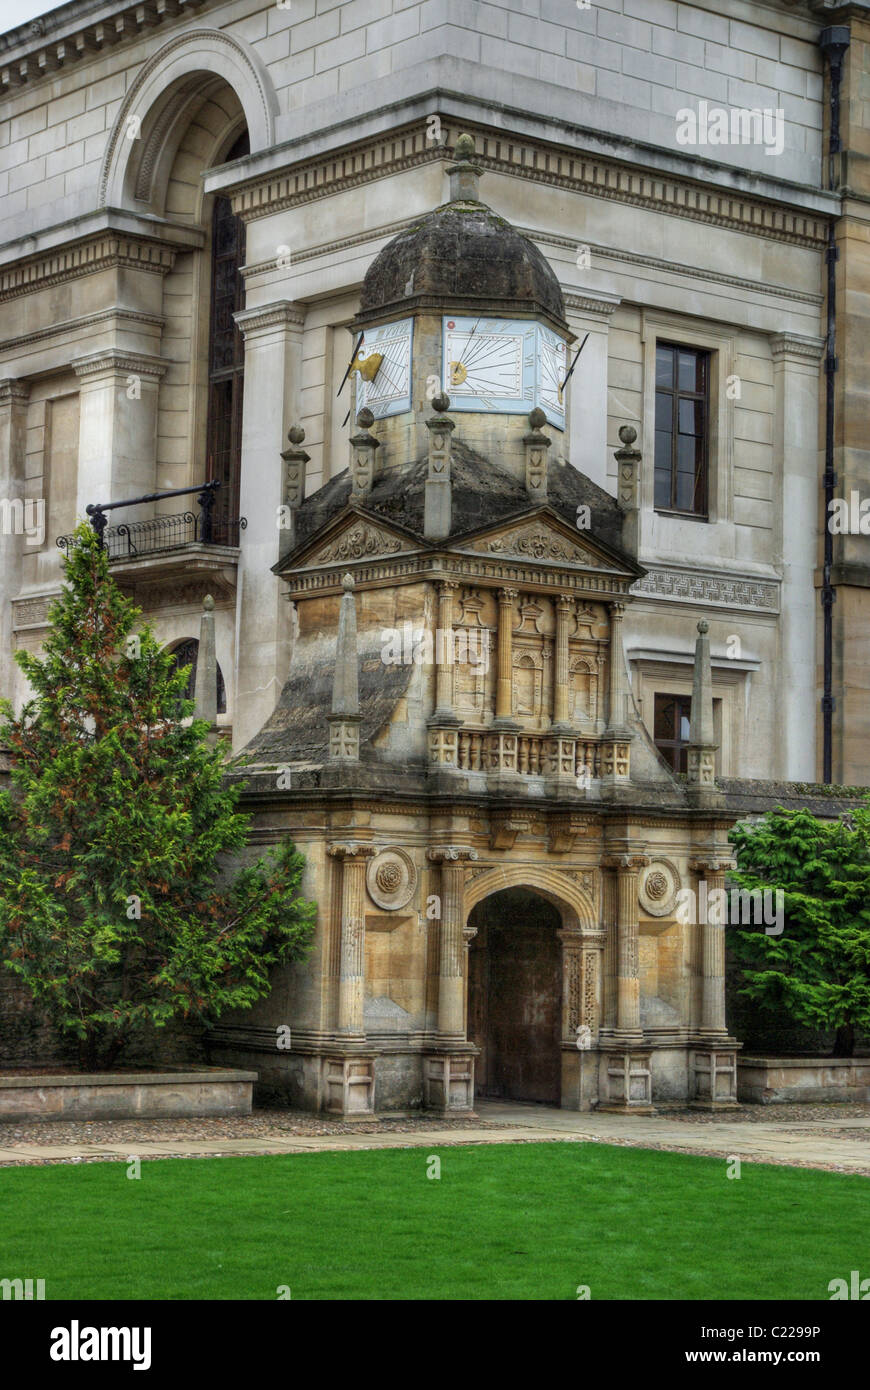 The Gate of Honour, Gonville and Caius College, Cambridge, UK Stock Photo